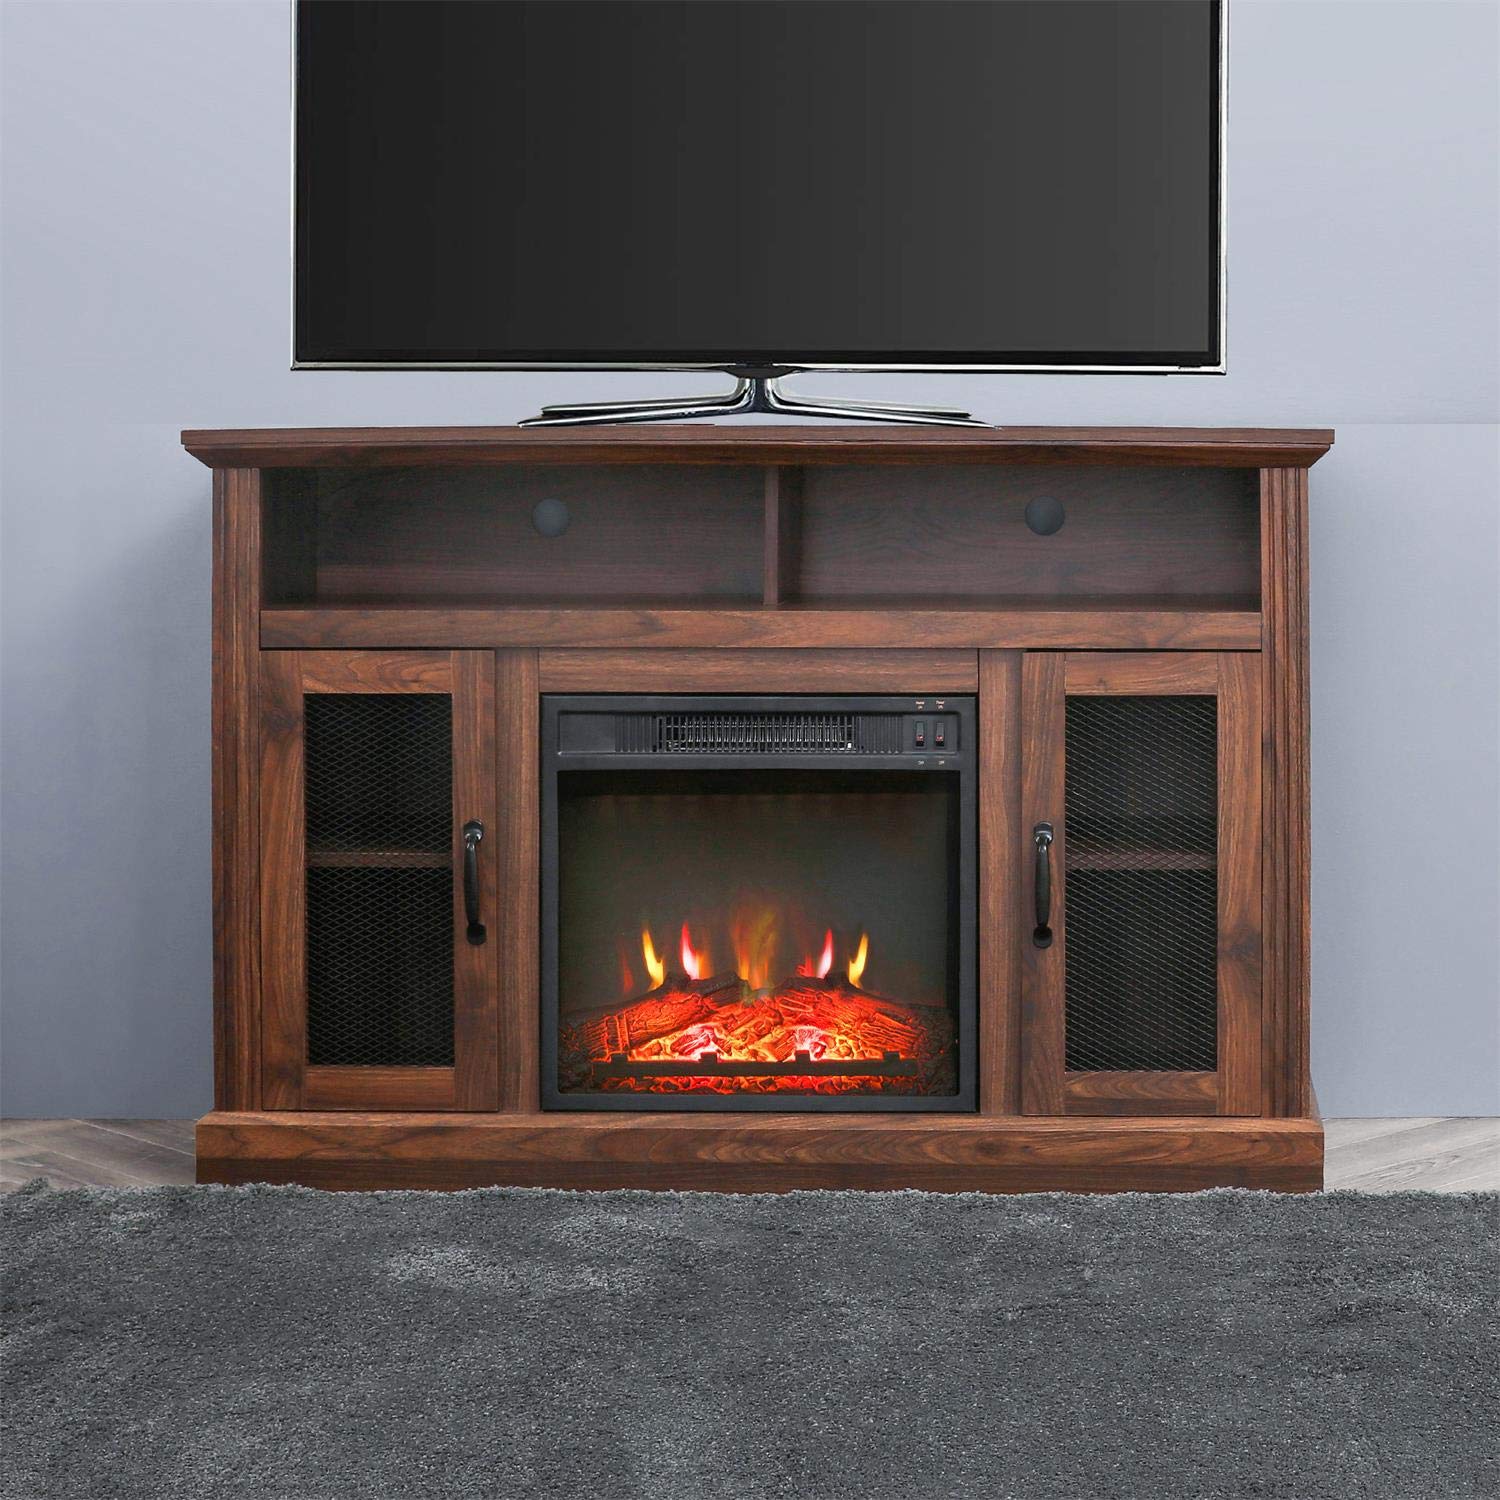 PatioFestival Fireplace TV Stand Electric fire Place heaters Entertainment Center Corner tv Console with fireplaces for TVs up to 42" Wide